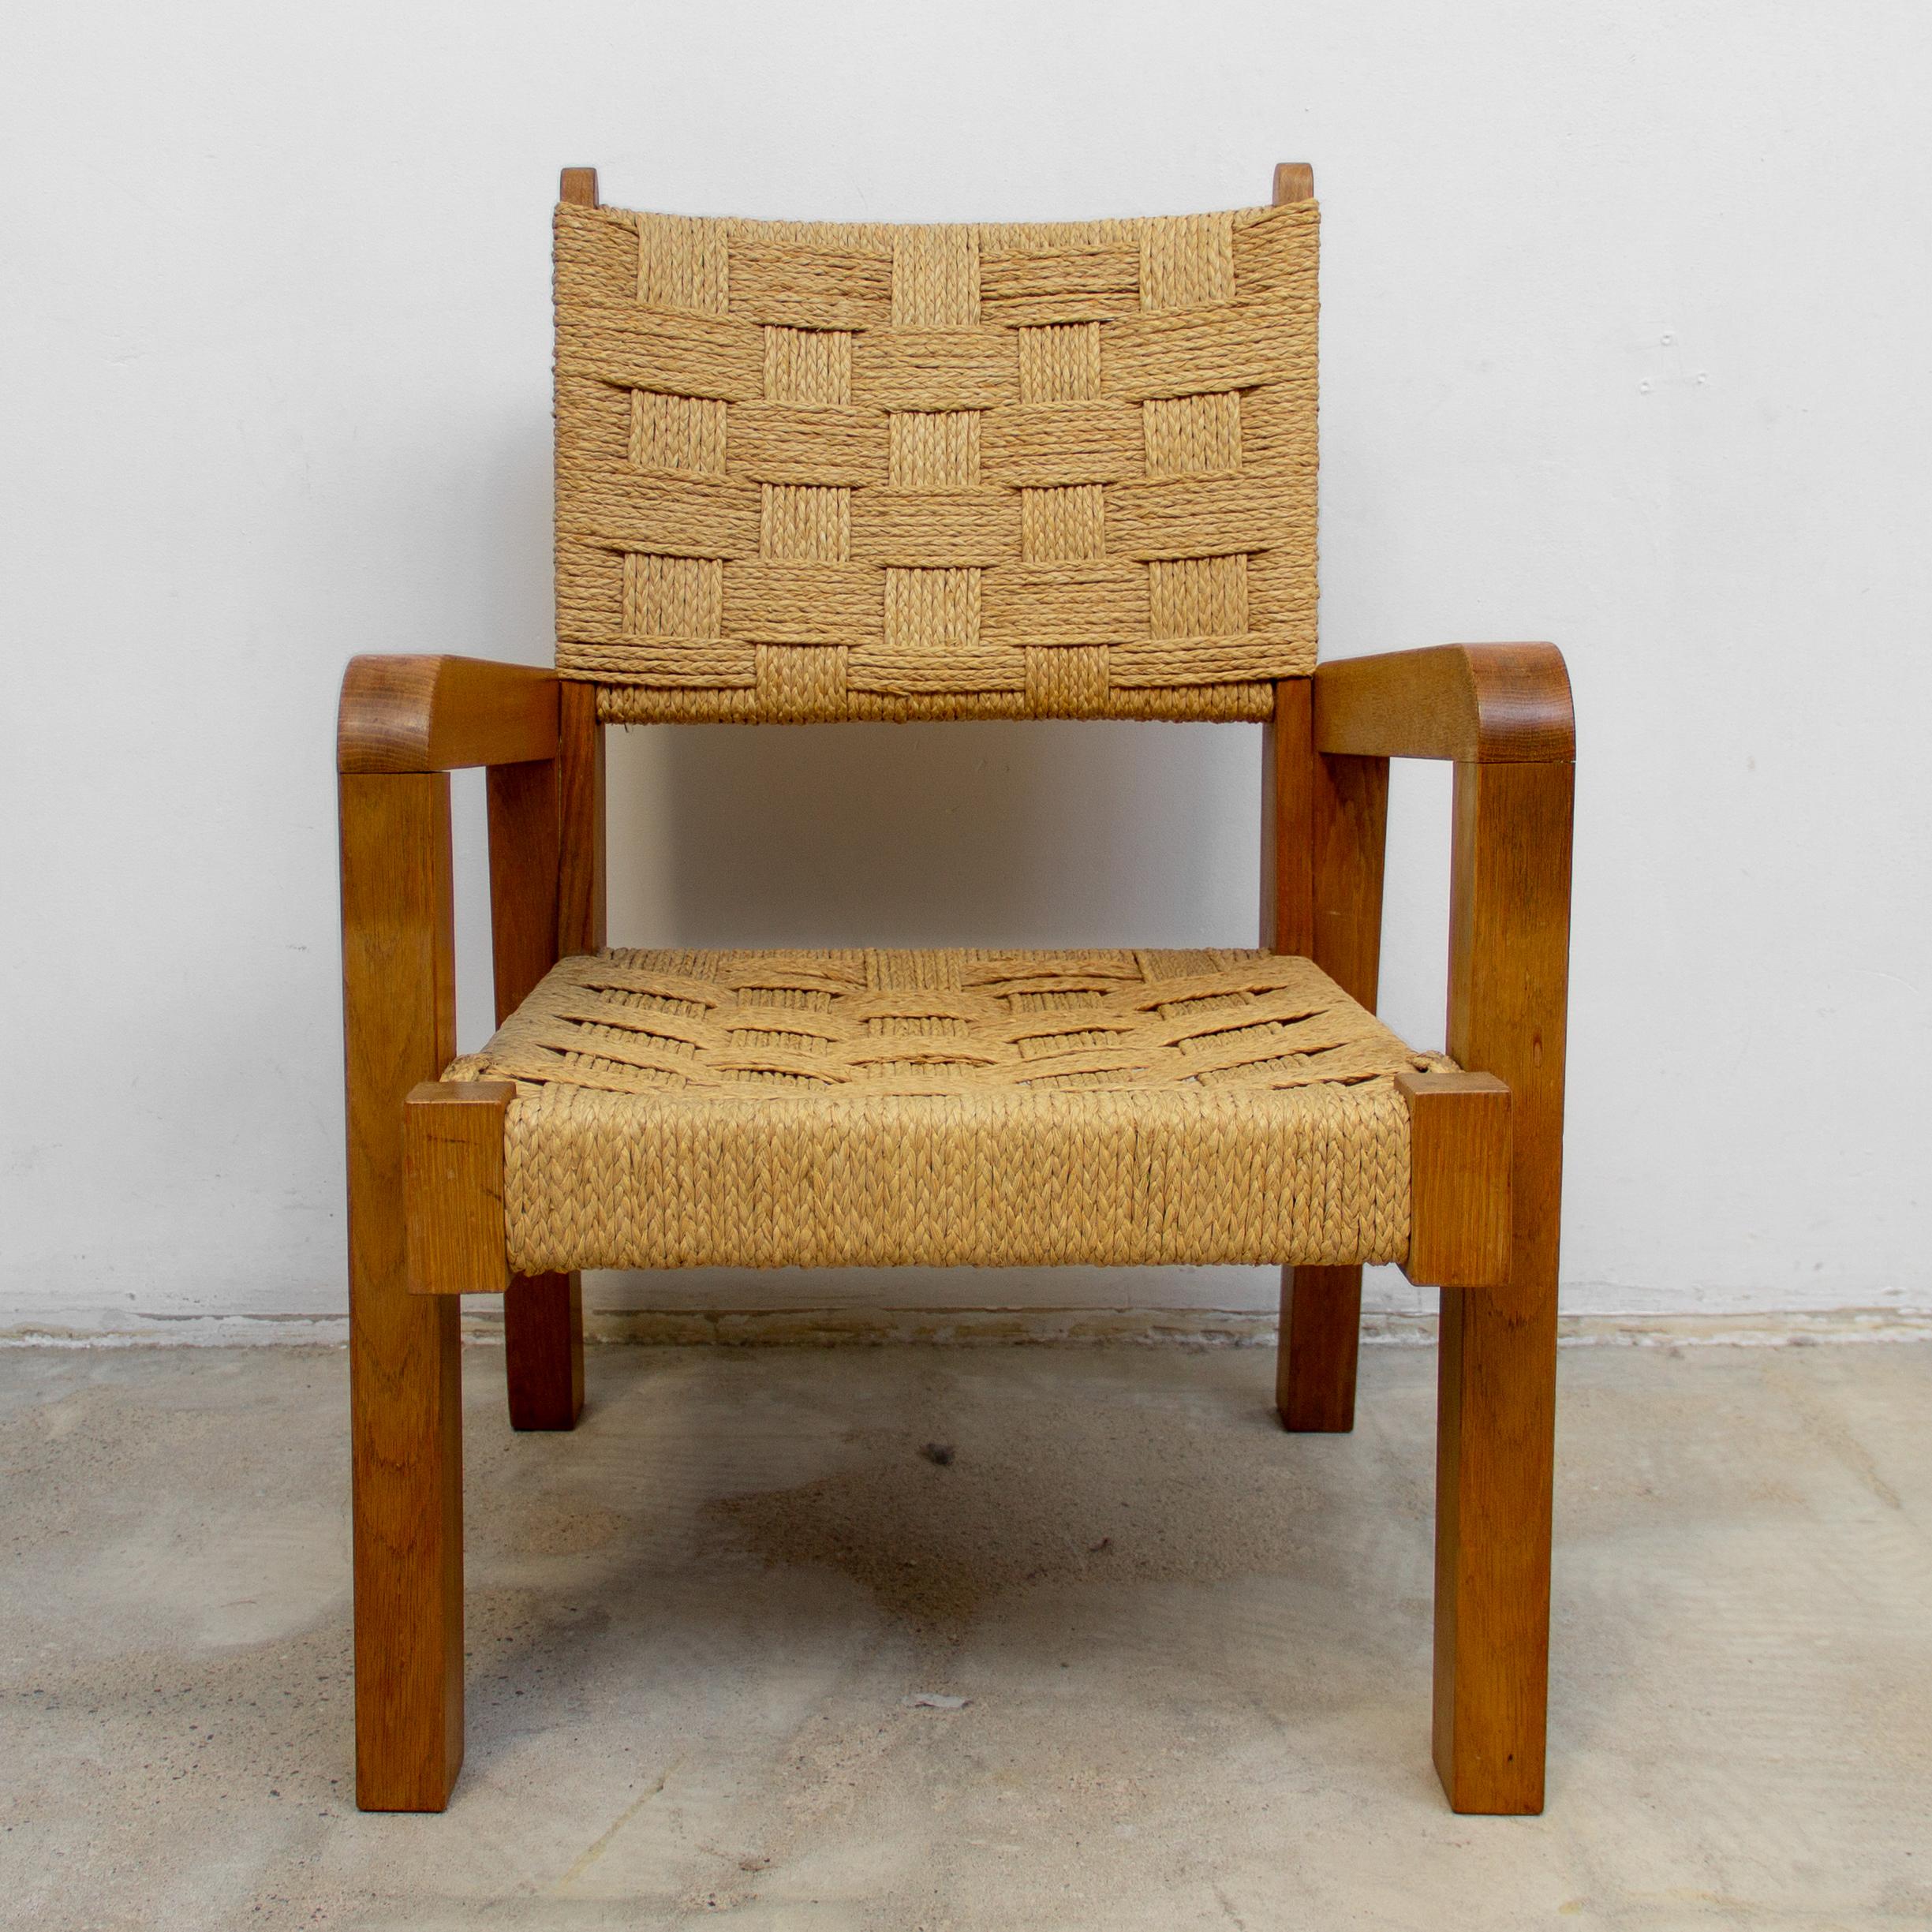 Rare modernist bold oakwood lounge chair and handcrafted raffia woven seating and backing. This bold shaped modernist lounge chair is executed in oakwood and wreath raffia weaving. Materials raffia and stained oak. The raffia wreath seat and